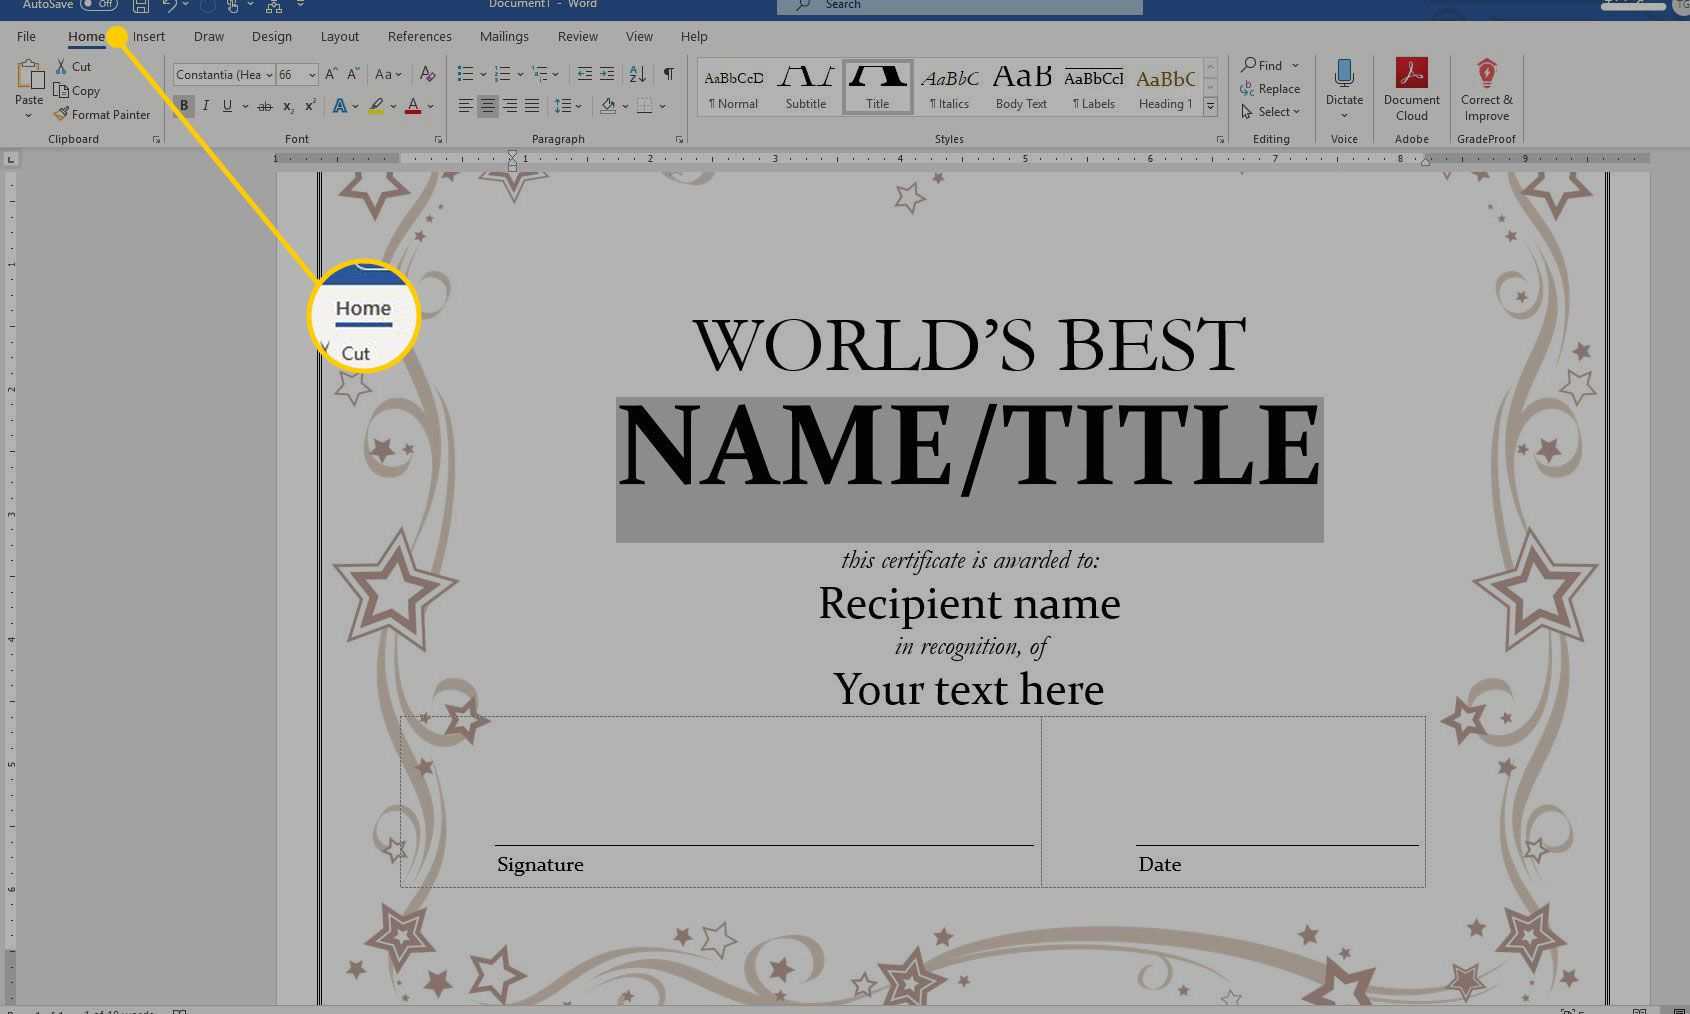 Using A Certificate Template In Microsoft Word Within This Certificate Entitles The Bearer To Template